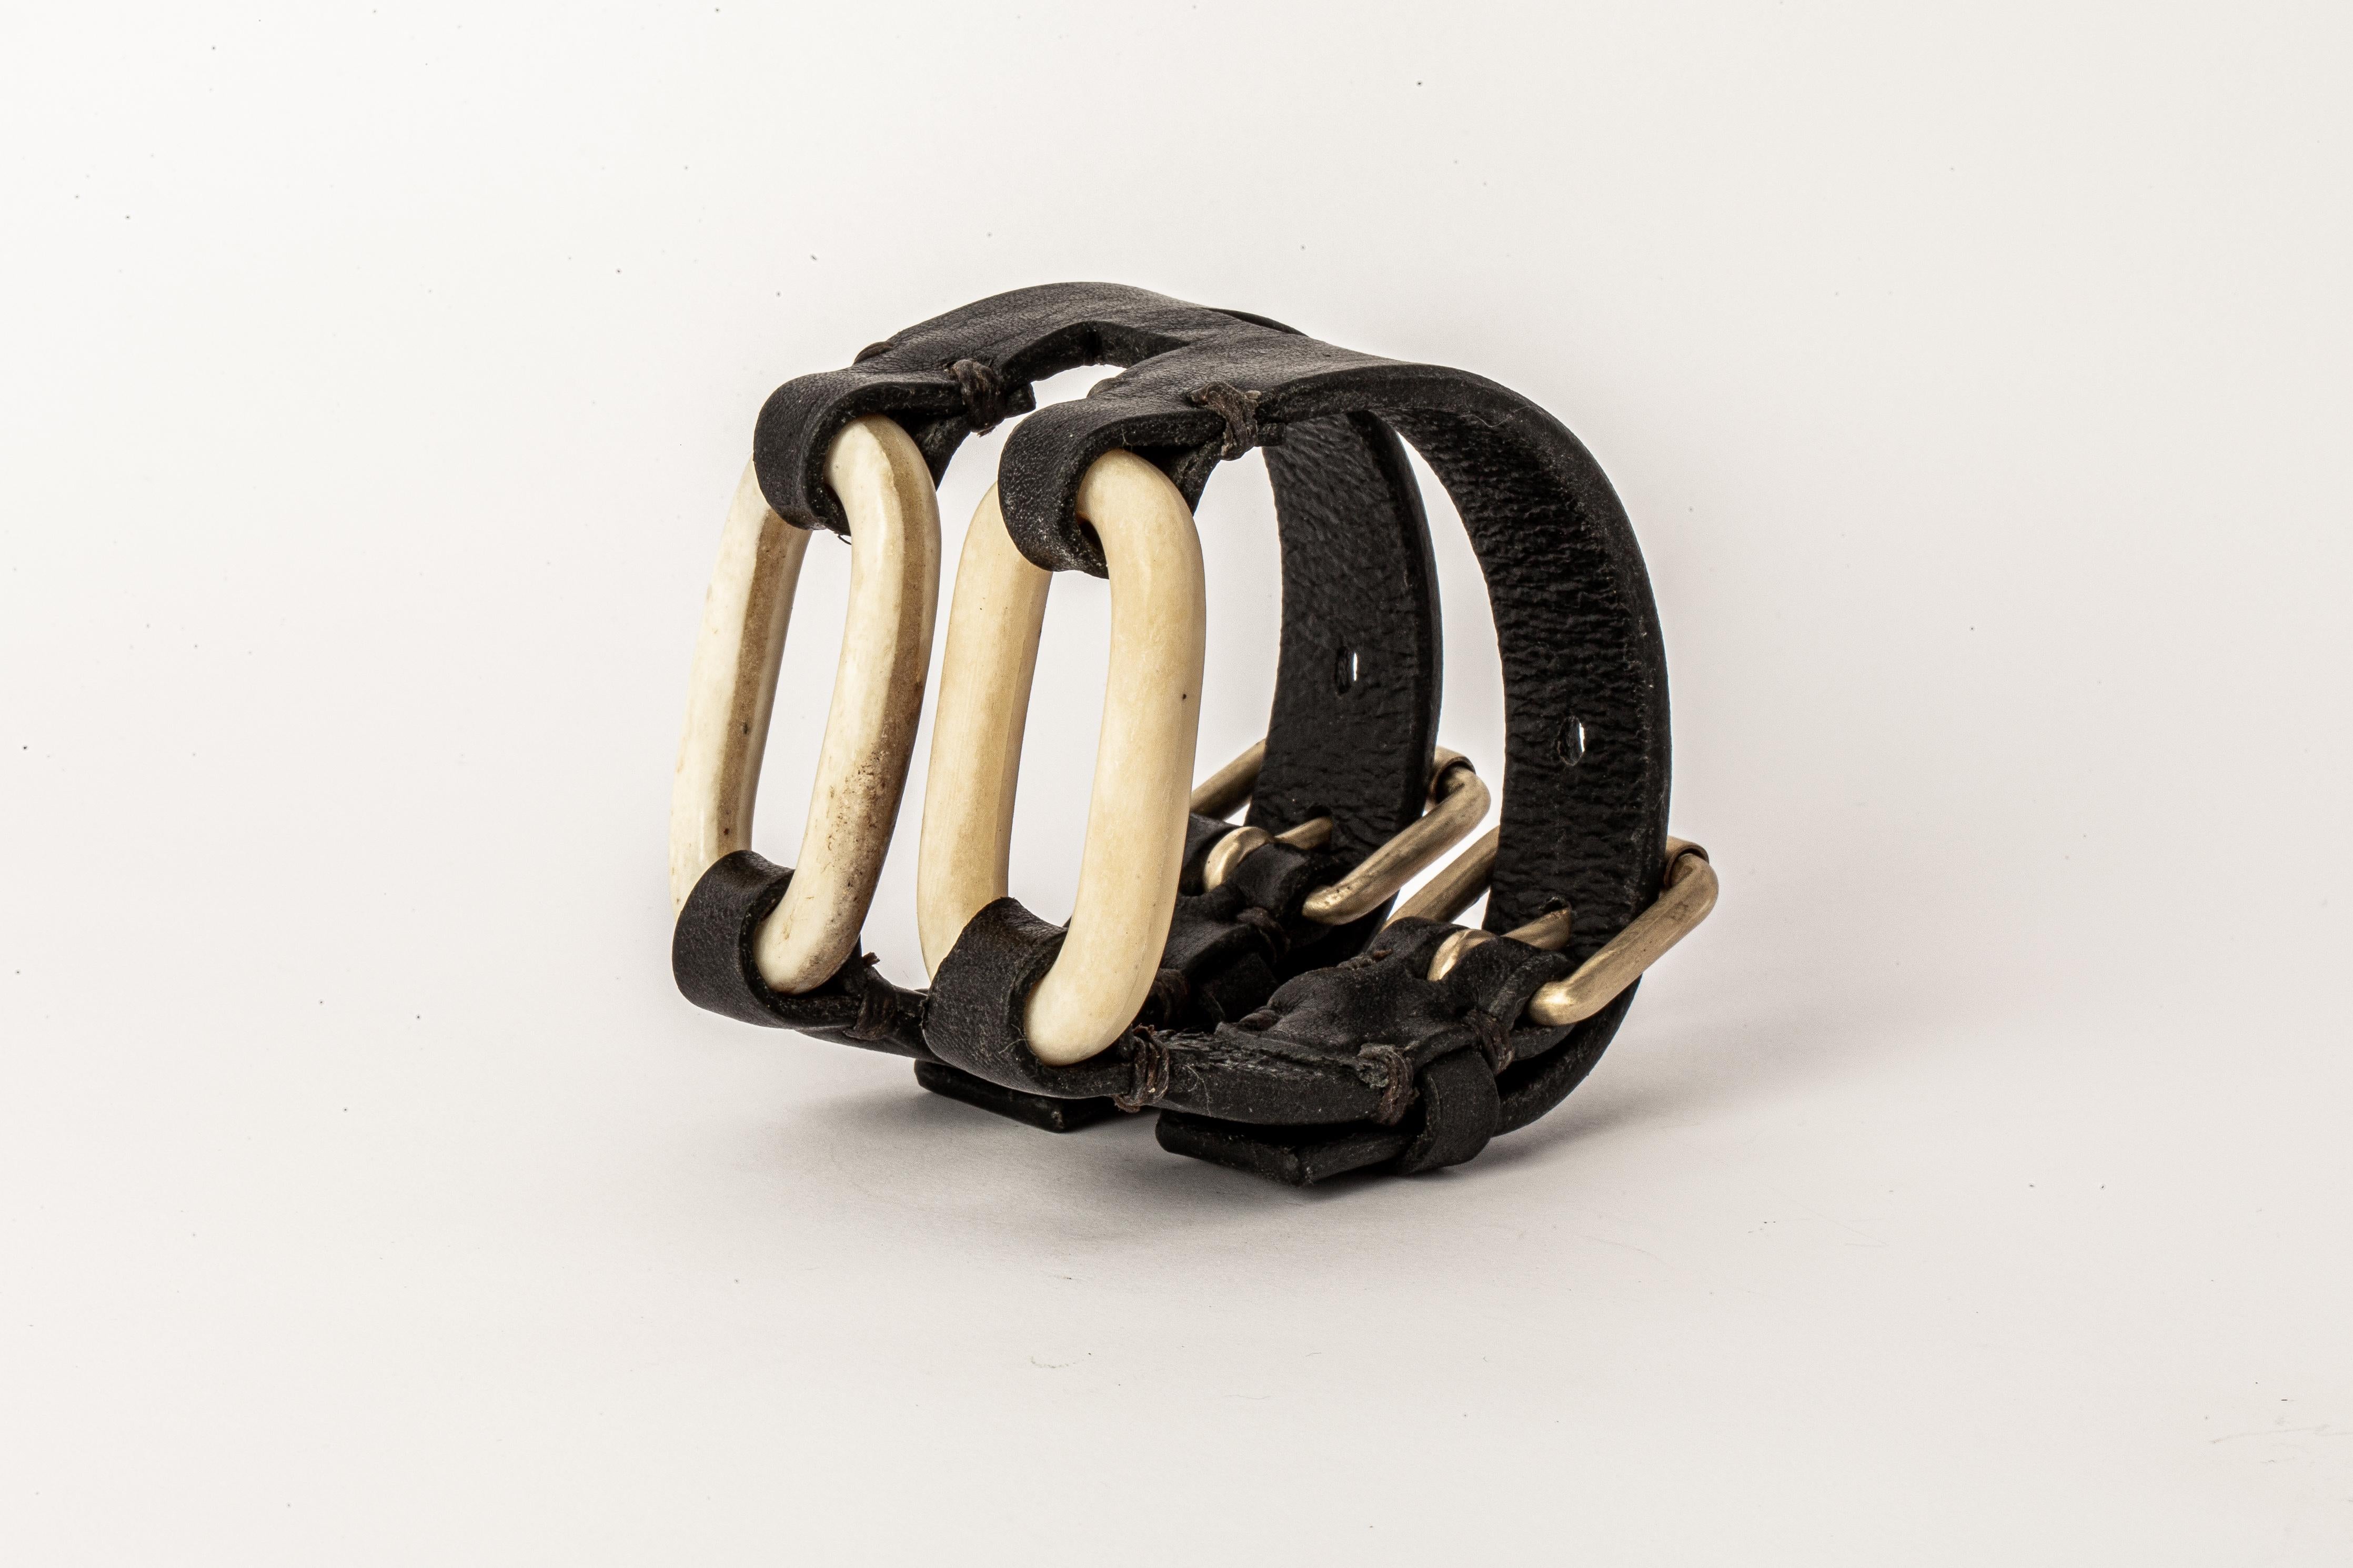 Bracelet in water buffalo bone and matte brass. This item has elements that have been carved entirely by hand.
Dimensions:
Bracelet width: 50 mm
Chain link size (L × H): 50 mm × 25 mm
Weight: 60 grams